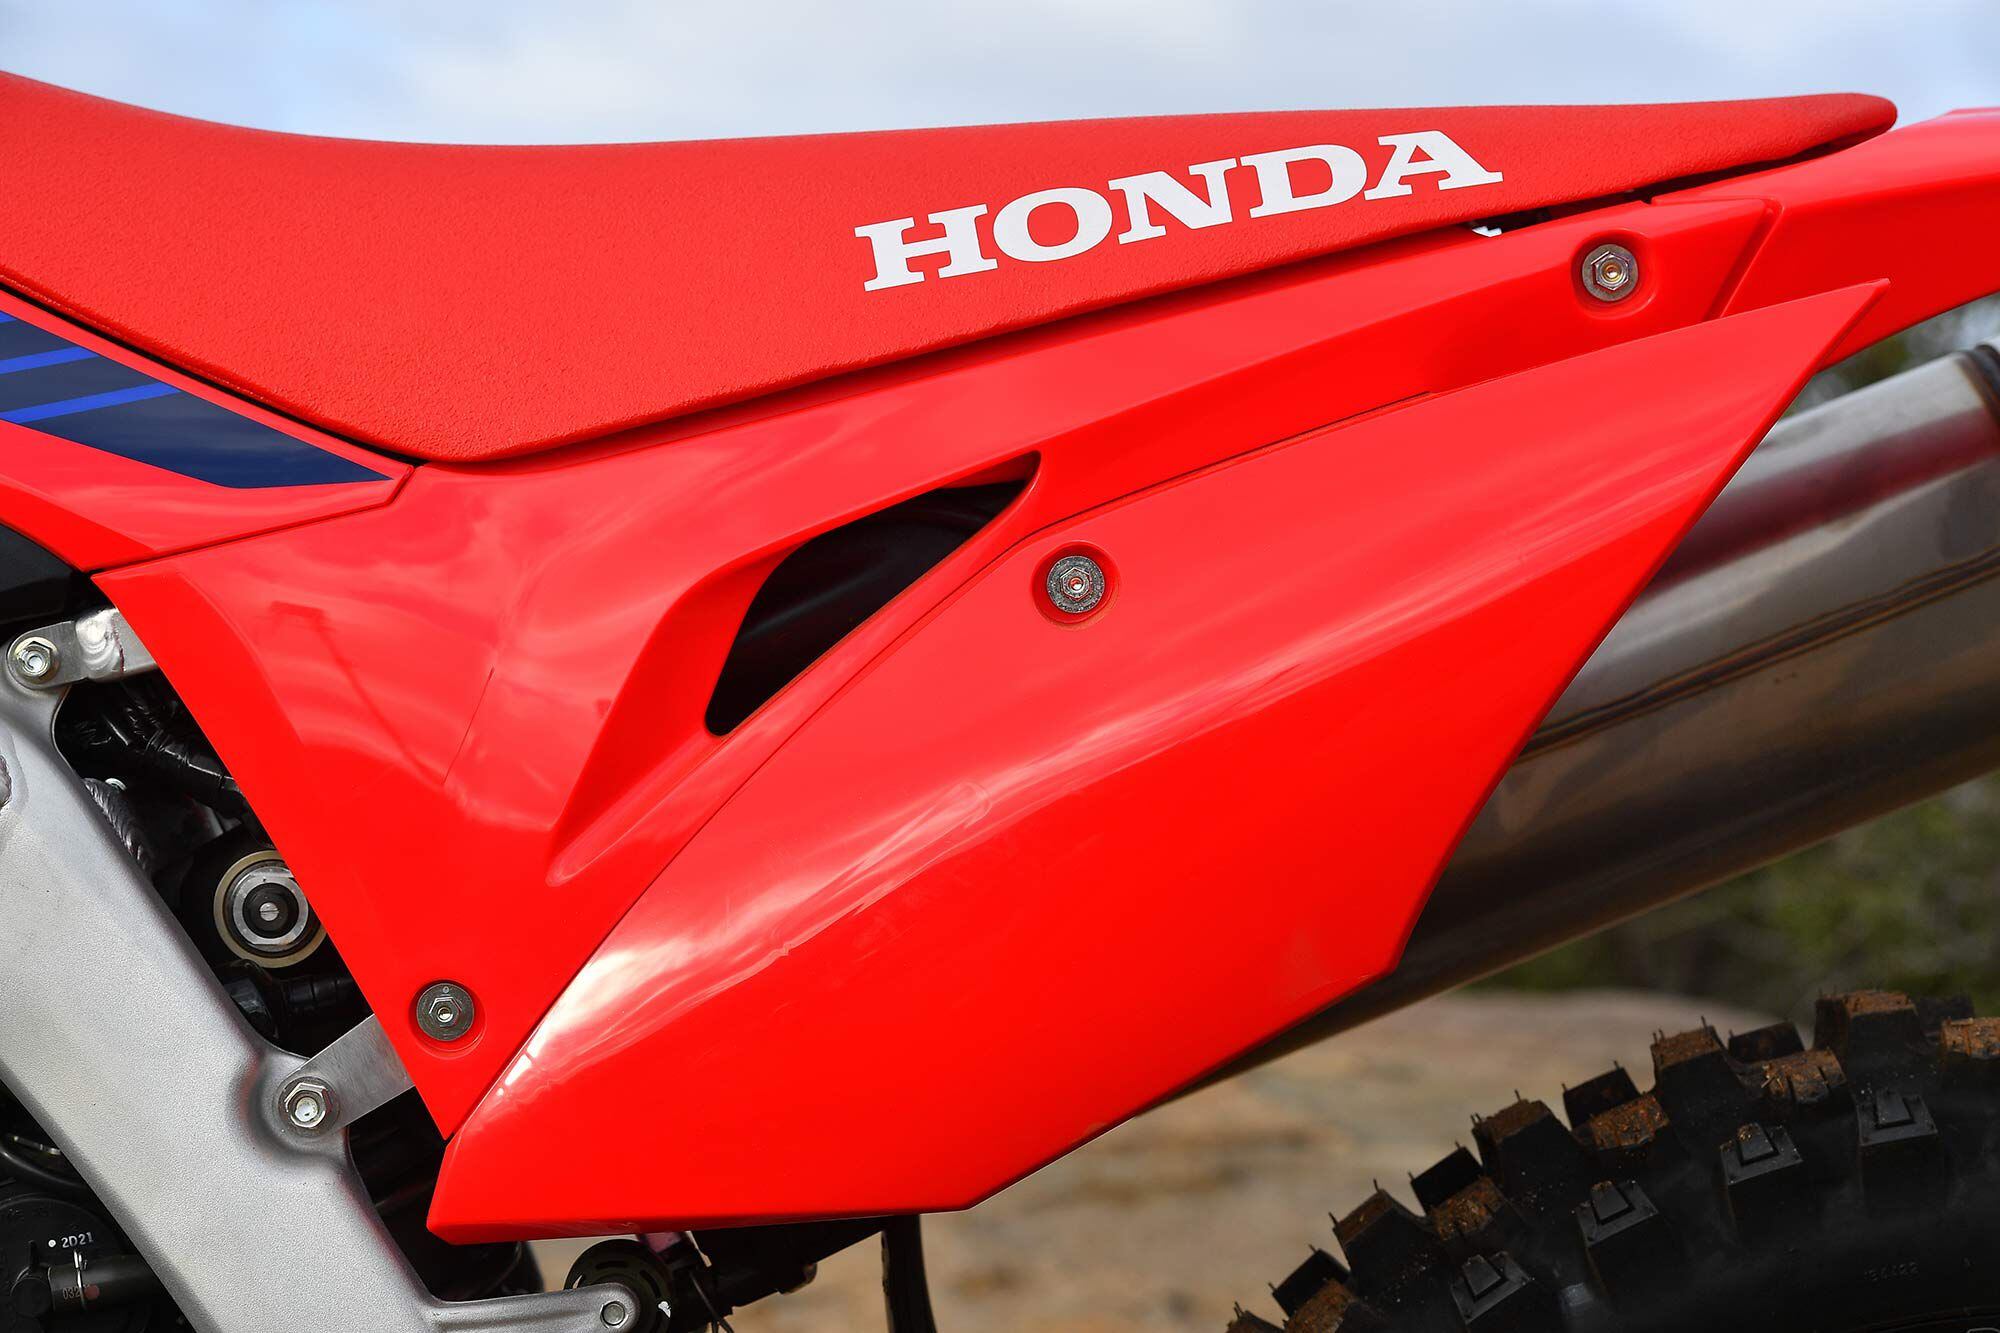 Check out these 10mm seat bolts in the traditional rear position on the CRF450X. While the CRF450R and CRF450RX seats slip on from front to back, the CRF450X still mounts from back to front. Interesting to note the blocked-off side panel vents. This keeps sounds down, but chokes up horsepower output.